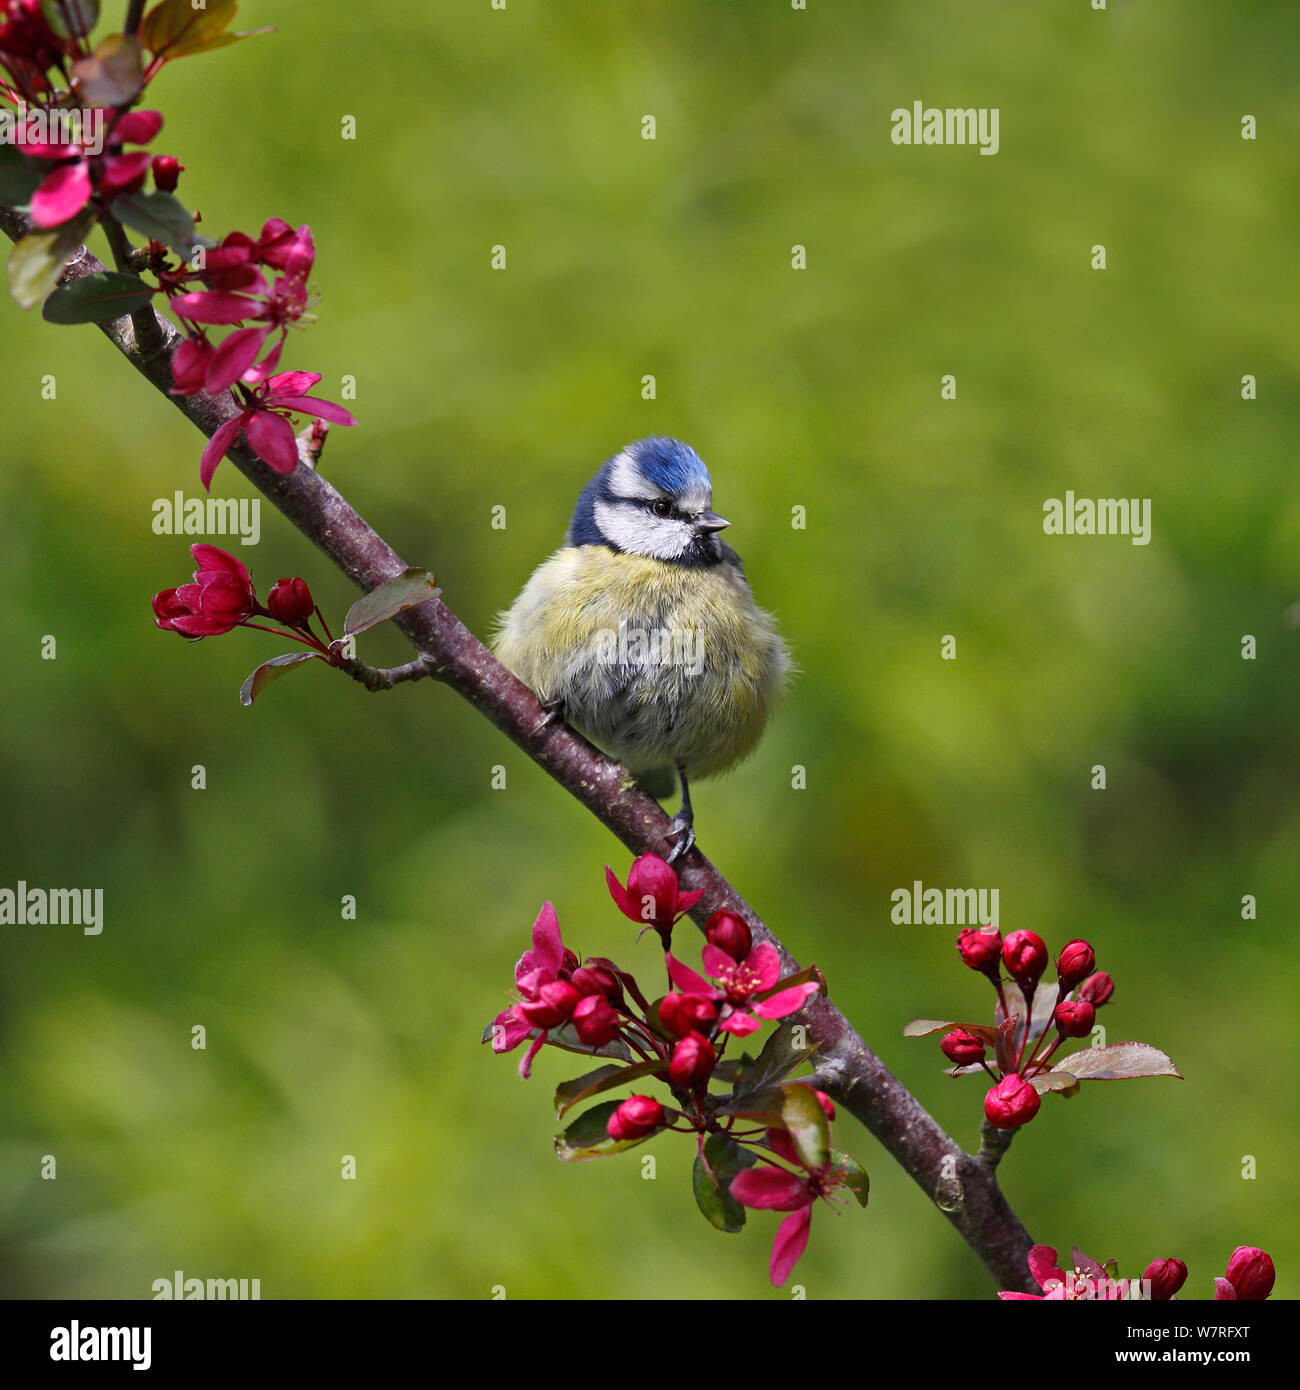 Blue Tit (Parus/Cyanistes caeruleus) perched in tree with blossom in garden, Cheshire, UK, May. Stock Photo